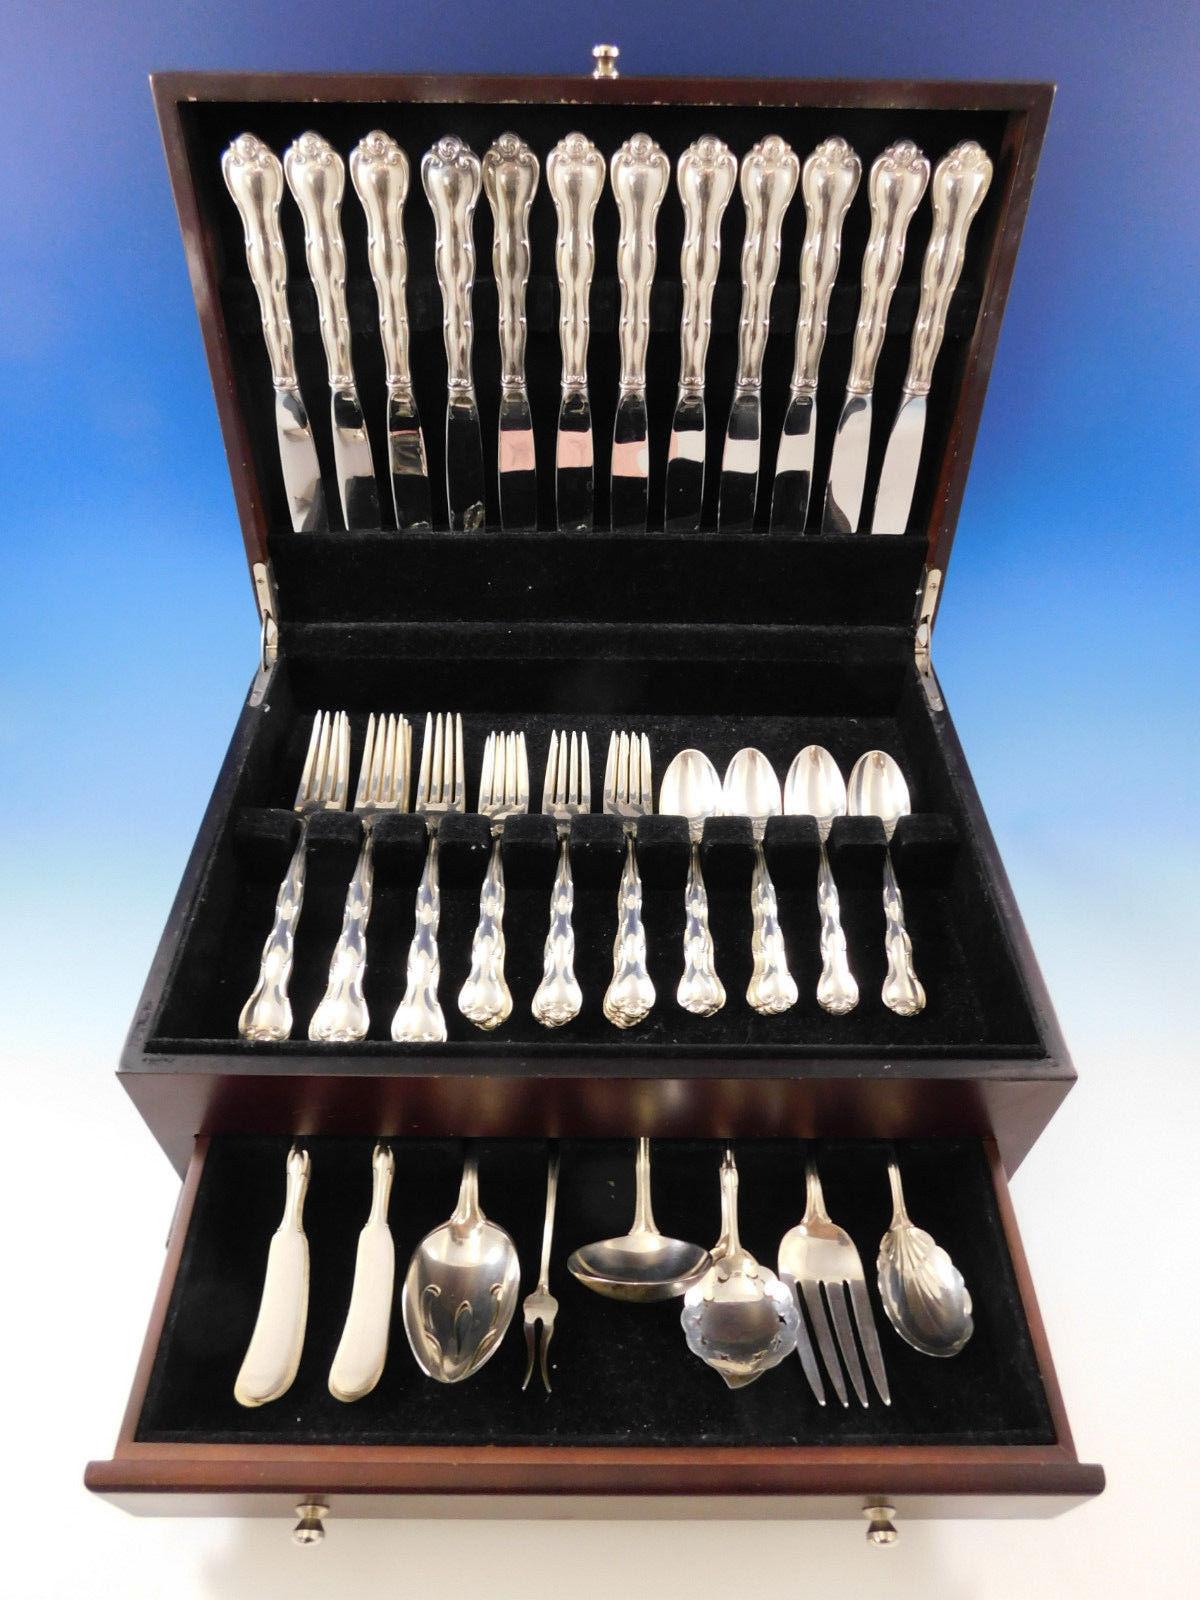 Dinner size Rondo by Gorham sterling silver flatware set, 68 pieces. This set includes:

12 dinner size knives, 9 5/8